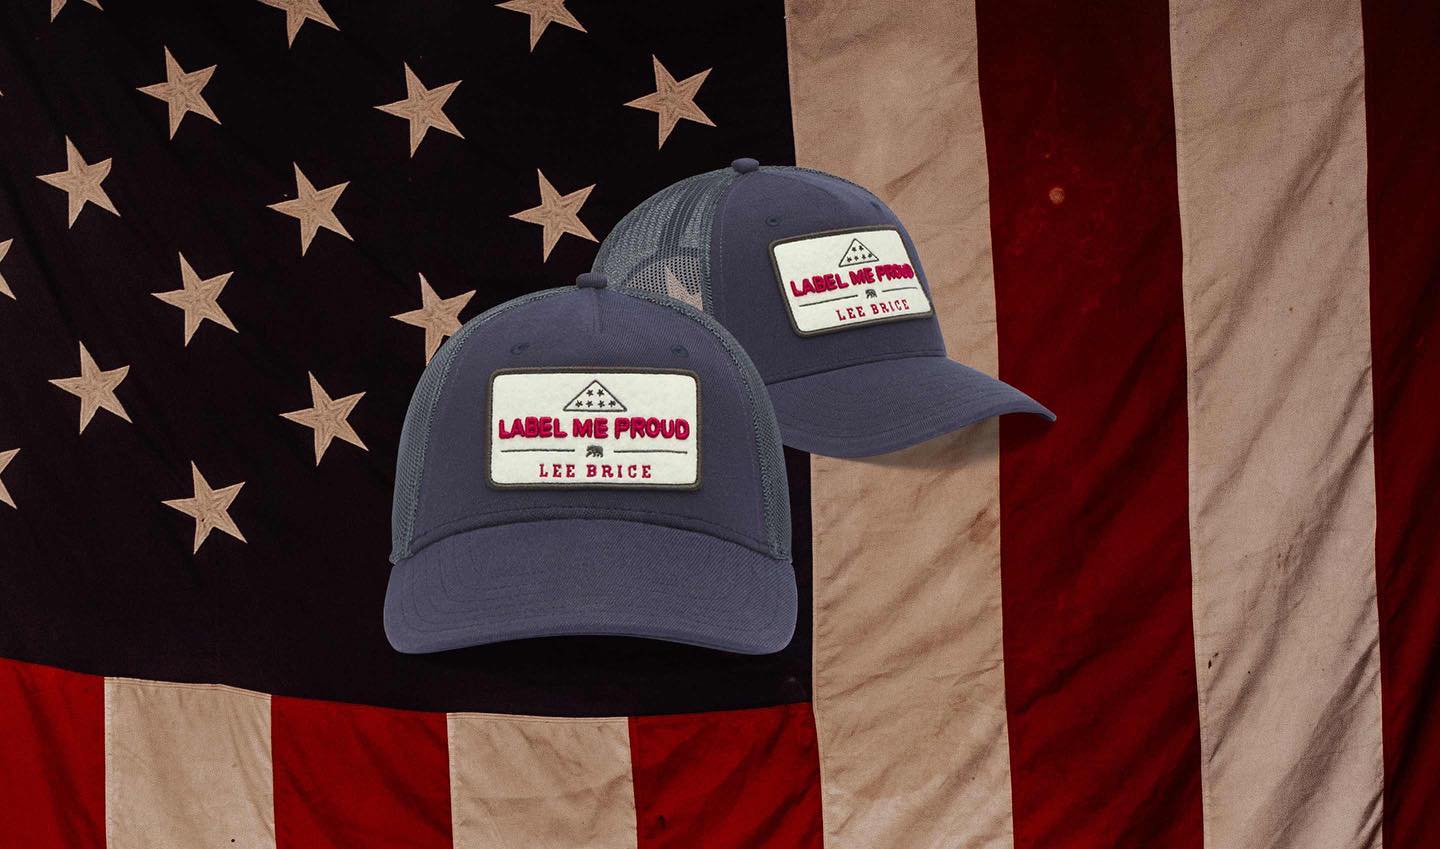 Our friends @thenormalbrand in Cherry Creek North are proud to announce its collaboration with Folds of Honor and multi-Platinum Country music star Lee Brice for a limited-edition “Label Me Proud” hat. The hat, which will be available for purchase this Memorial Day weekend only, will help to raise money to support Folds of Honor – a nonprofit organization that works to provide educational scholarships for the spouses and children of America’s fallen and disabled service members and first responders. #cherrycreekliving #cherrycreek #cherrycreeknorth #cherrycreekdenver #cherrycreekshopping #denvershopping #memorialdayweekend #denverfashion #cherrycreekfashion